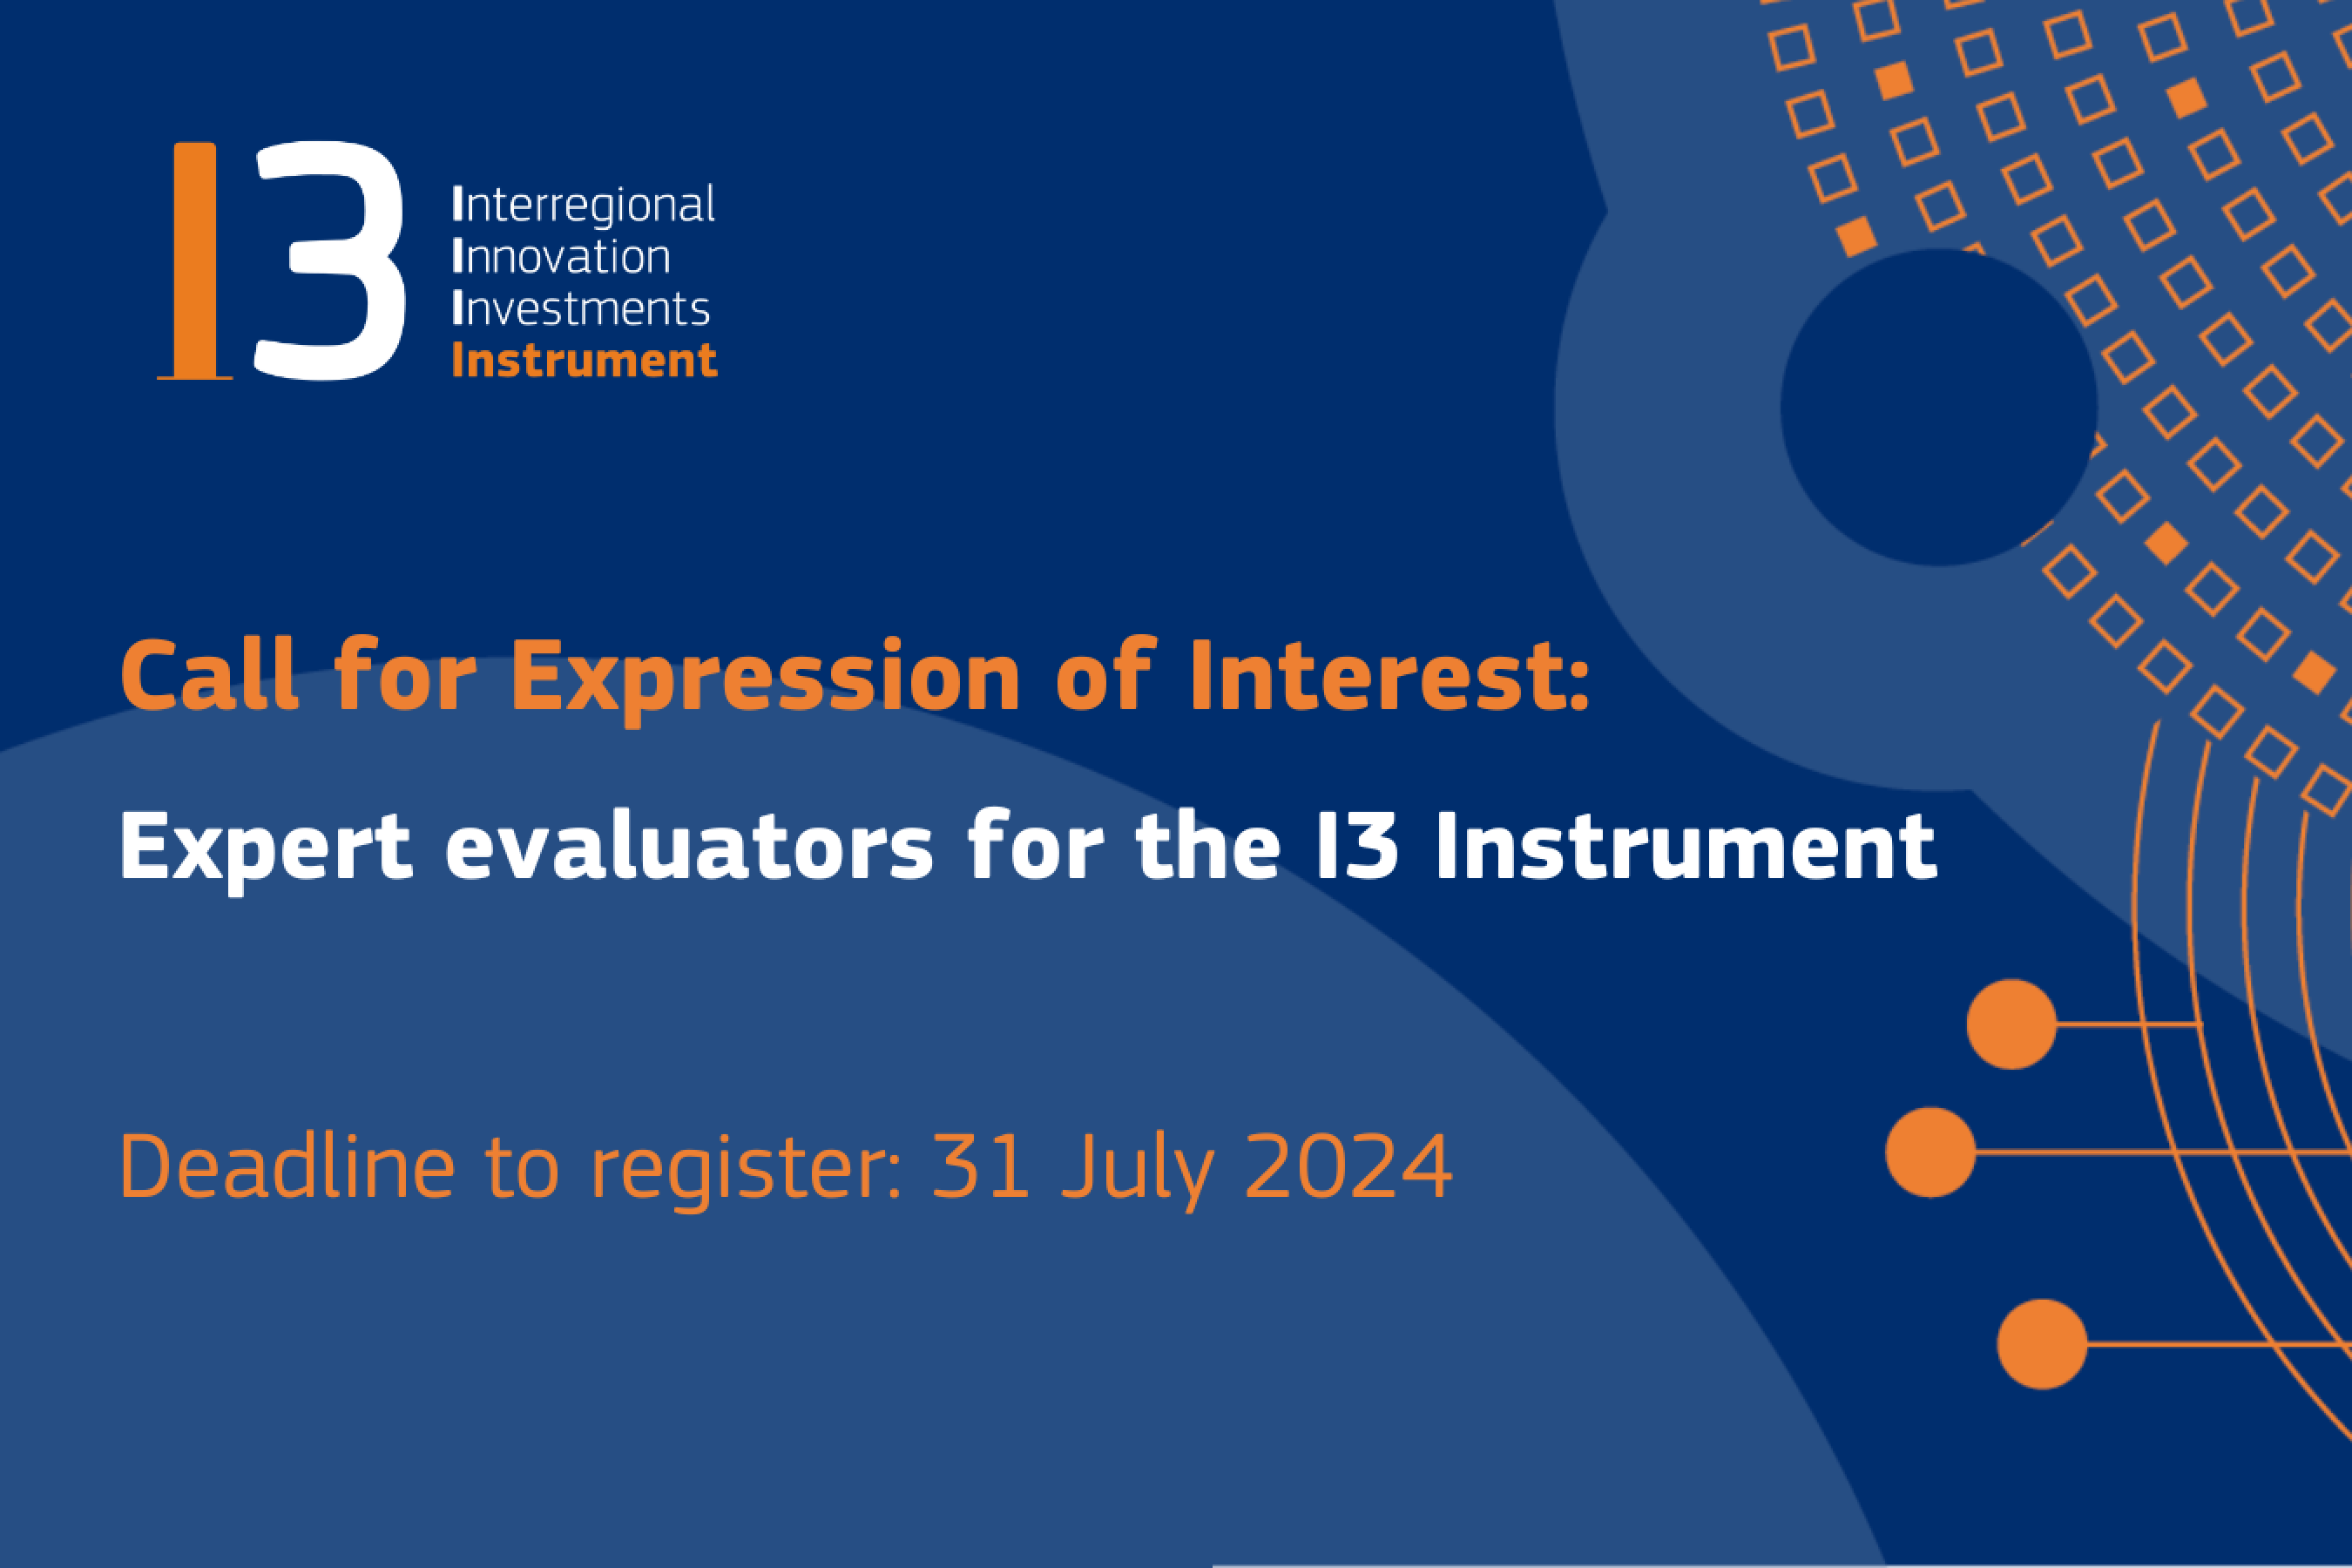 Call for expert evaluators for the I3 Instrument